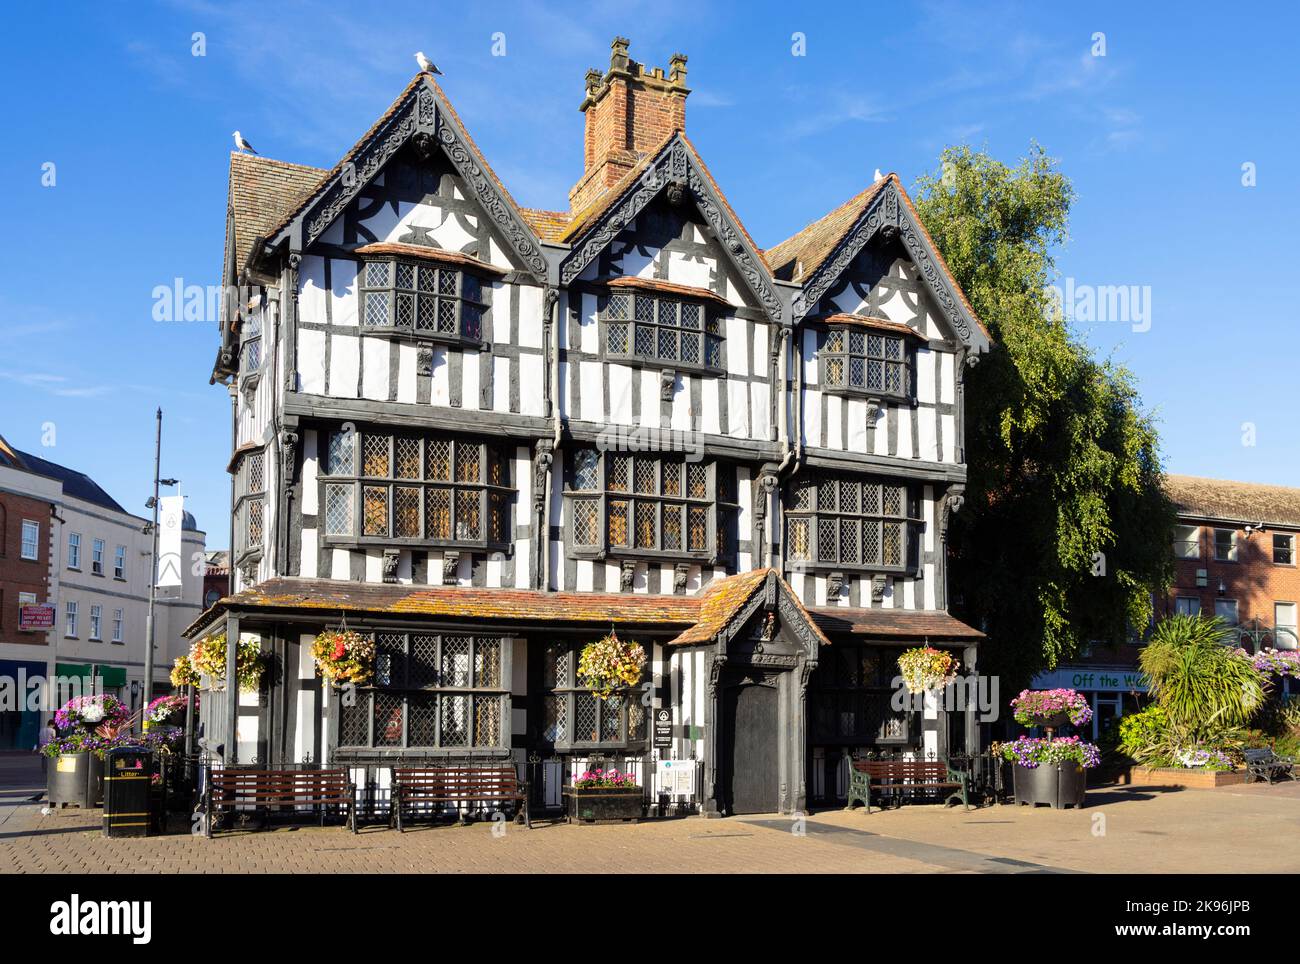 Hereford 17th Century The Old House or Black and White House Museum St Peter's st High Town Hereford Herefordshire England UK GB Europe Stock Photo